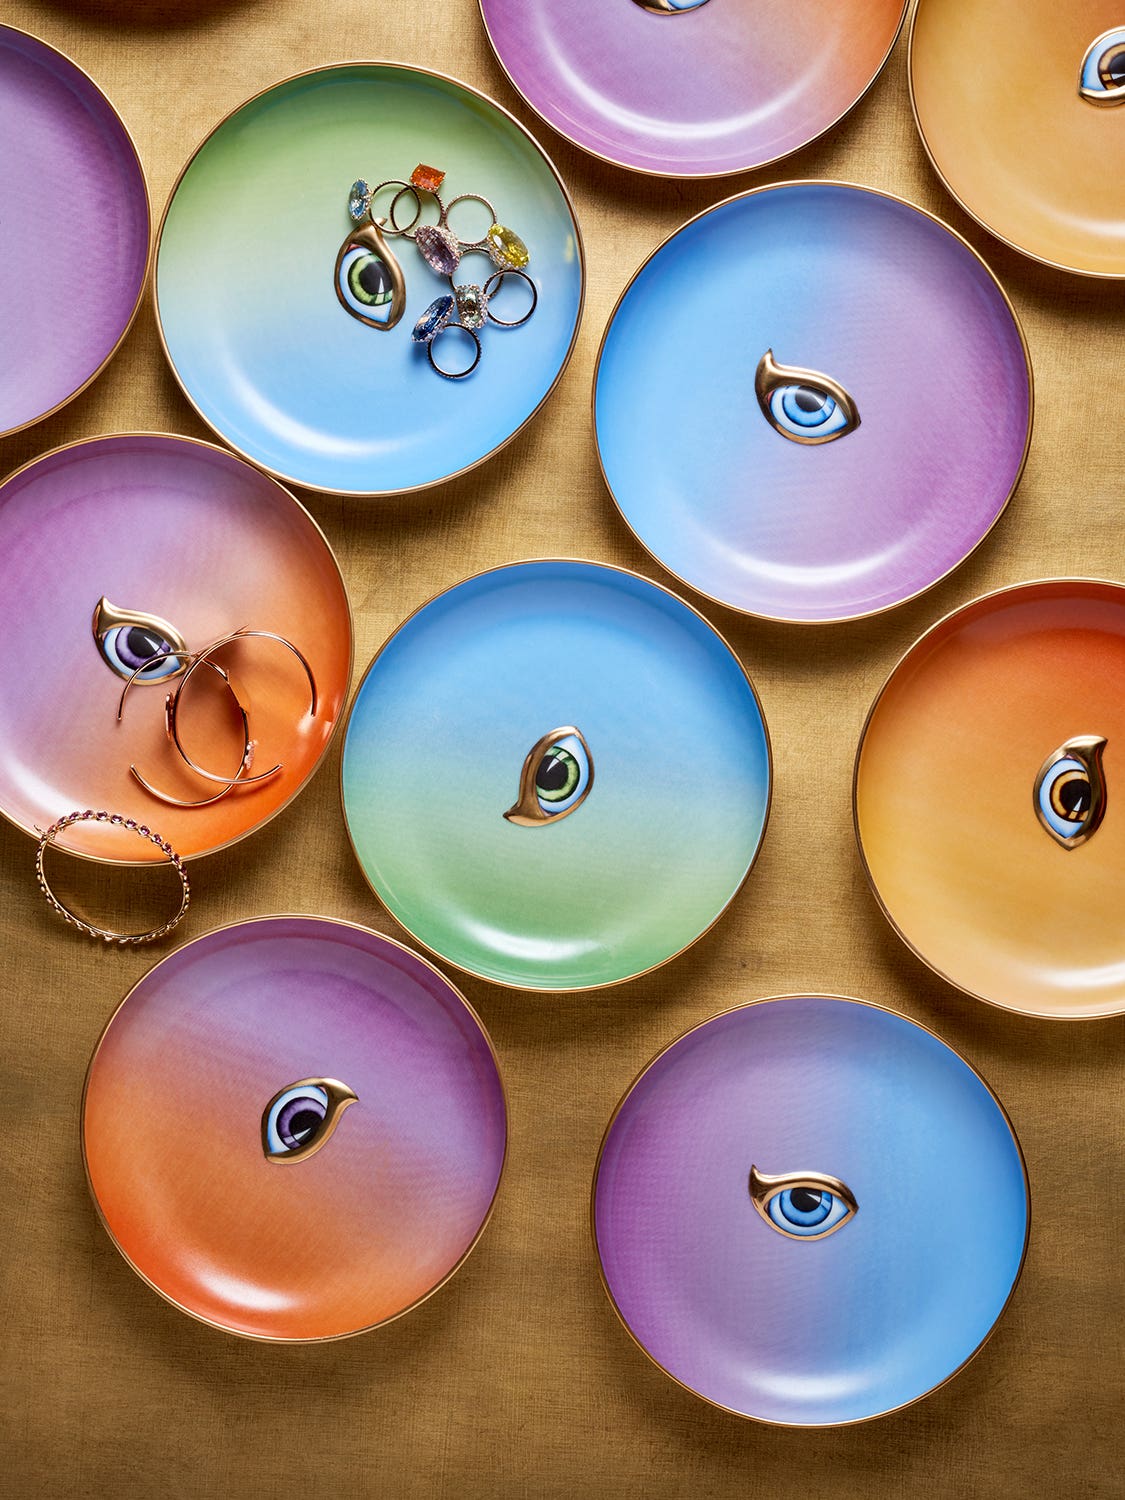 In Defense of a Really Nice Ring Dish